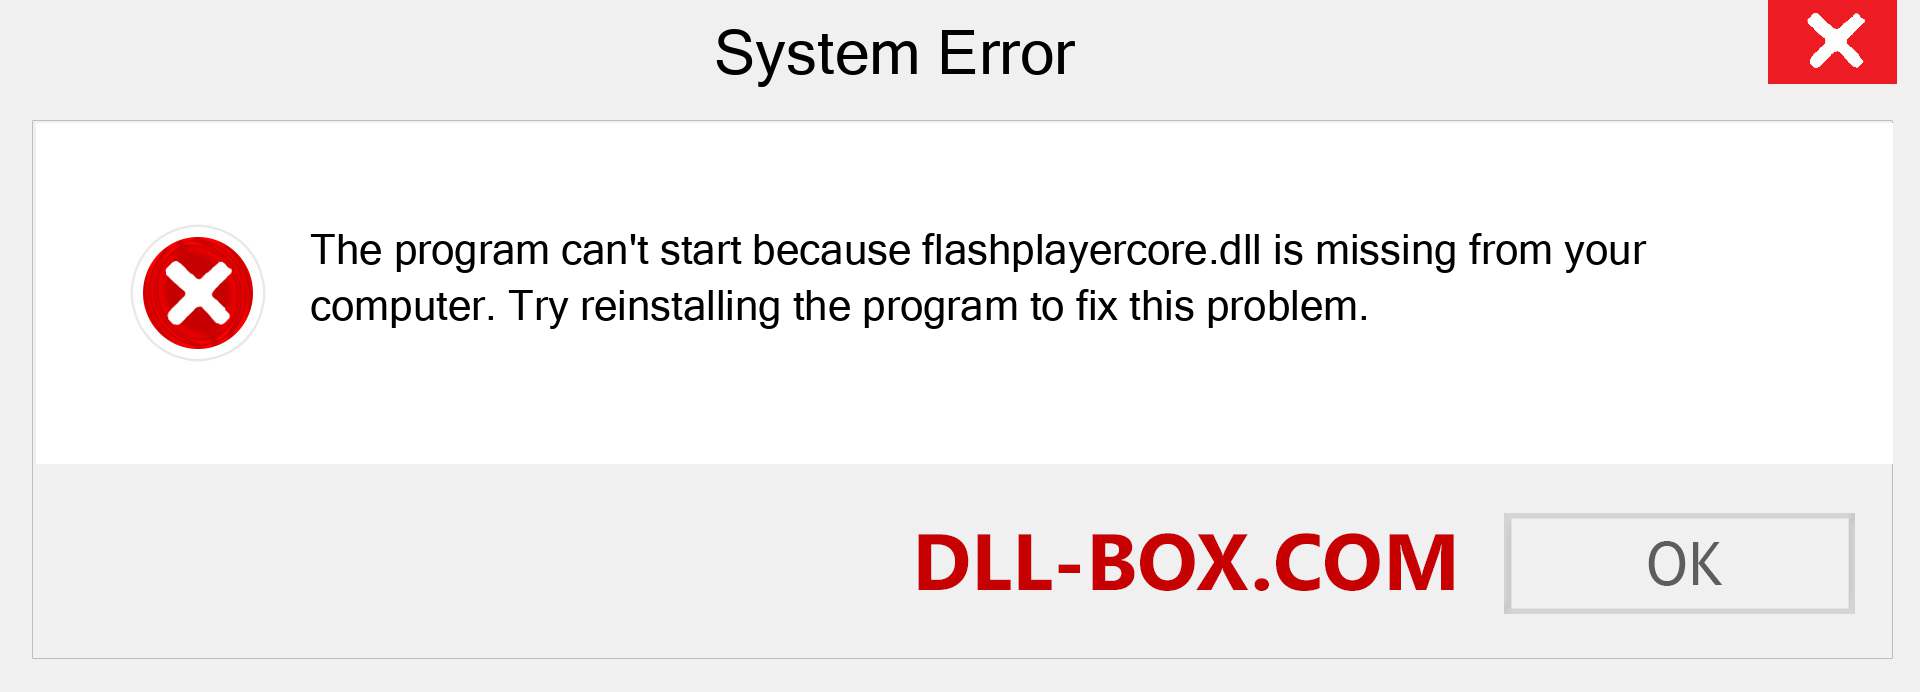  flashplayercore.dll file is missing?. Download for Windows 7, 8, 10 - Fix  flashplayercore dll Missing Error on Windows, photos, images